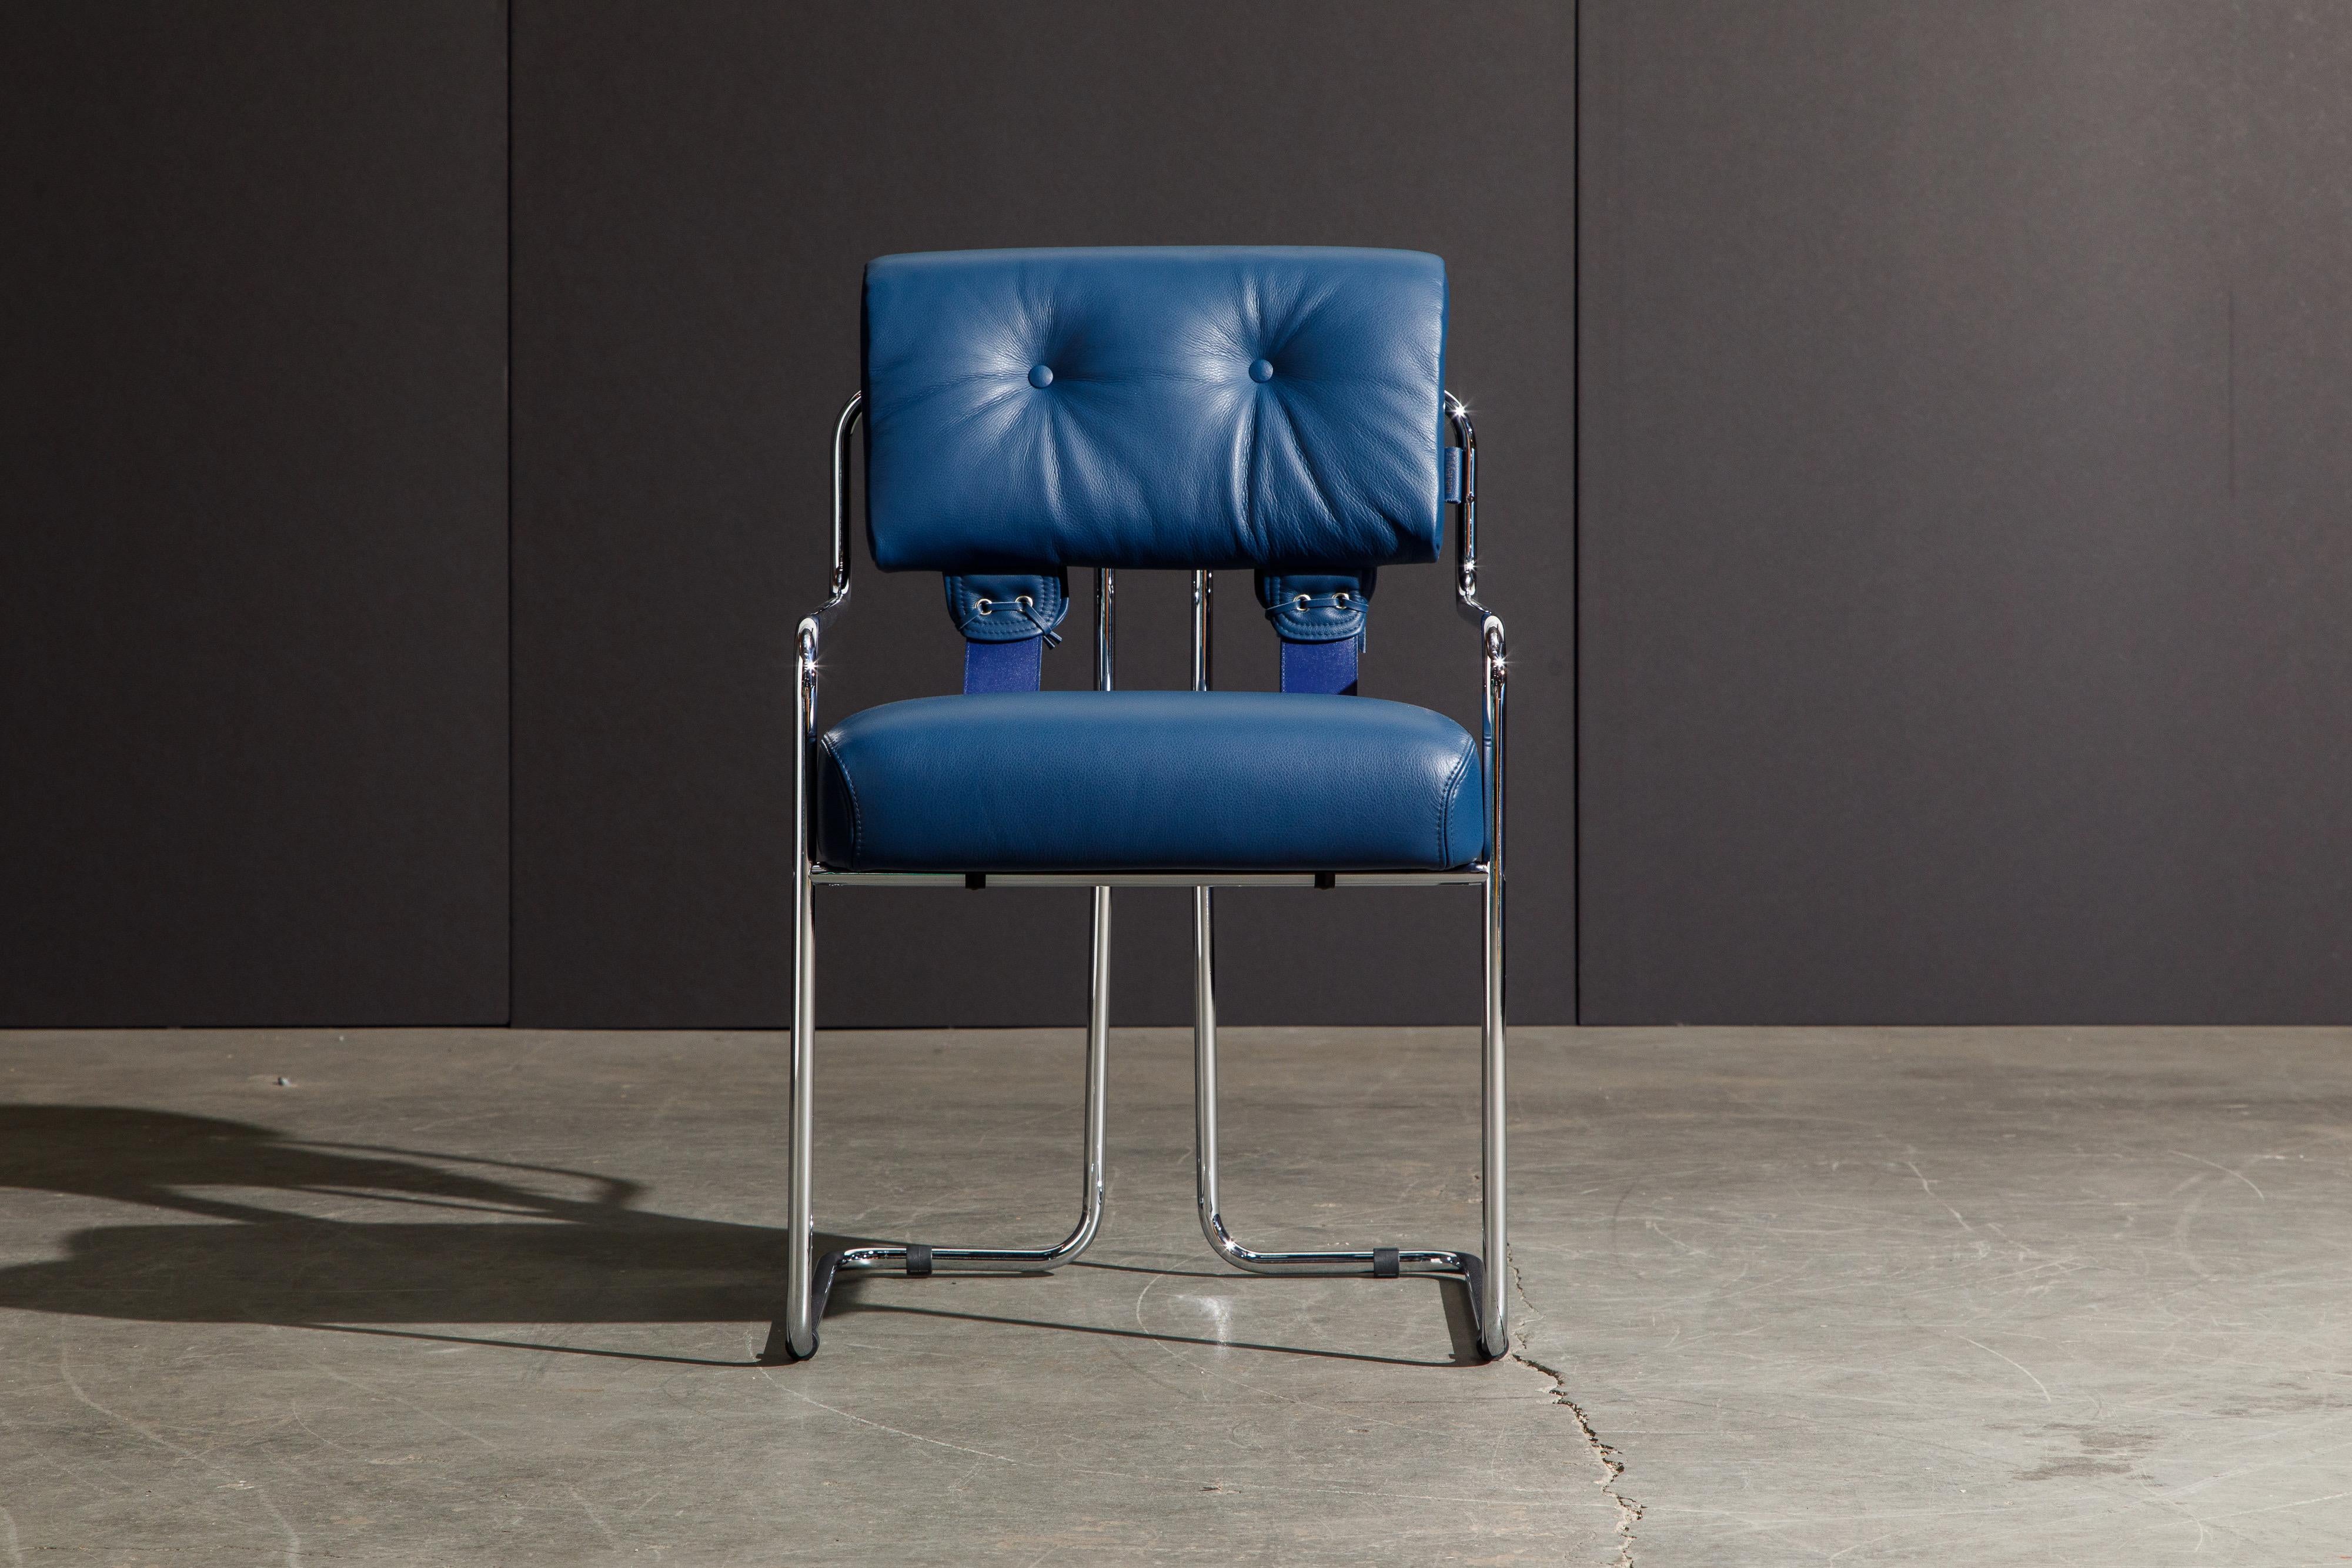 Currently, the most coveted dining chairs by interior designers are 'Tucroma' chairs by Guido Faleschini for i4 Mariani, and we have this incredible set of four (4) Tucroma armchairs in beautiful blue leather with polished chrome frames. The seats